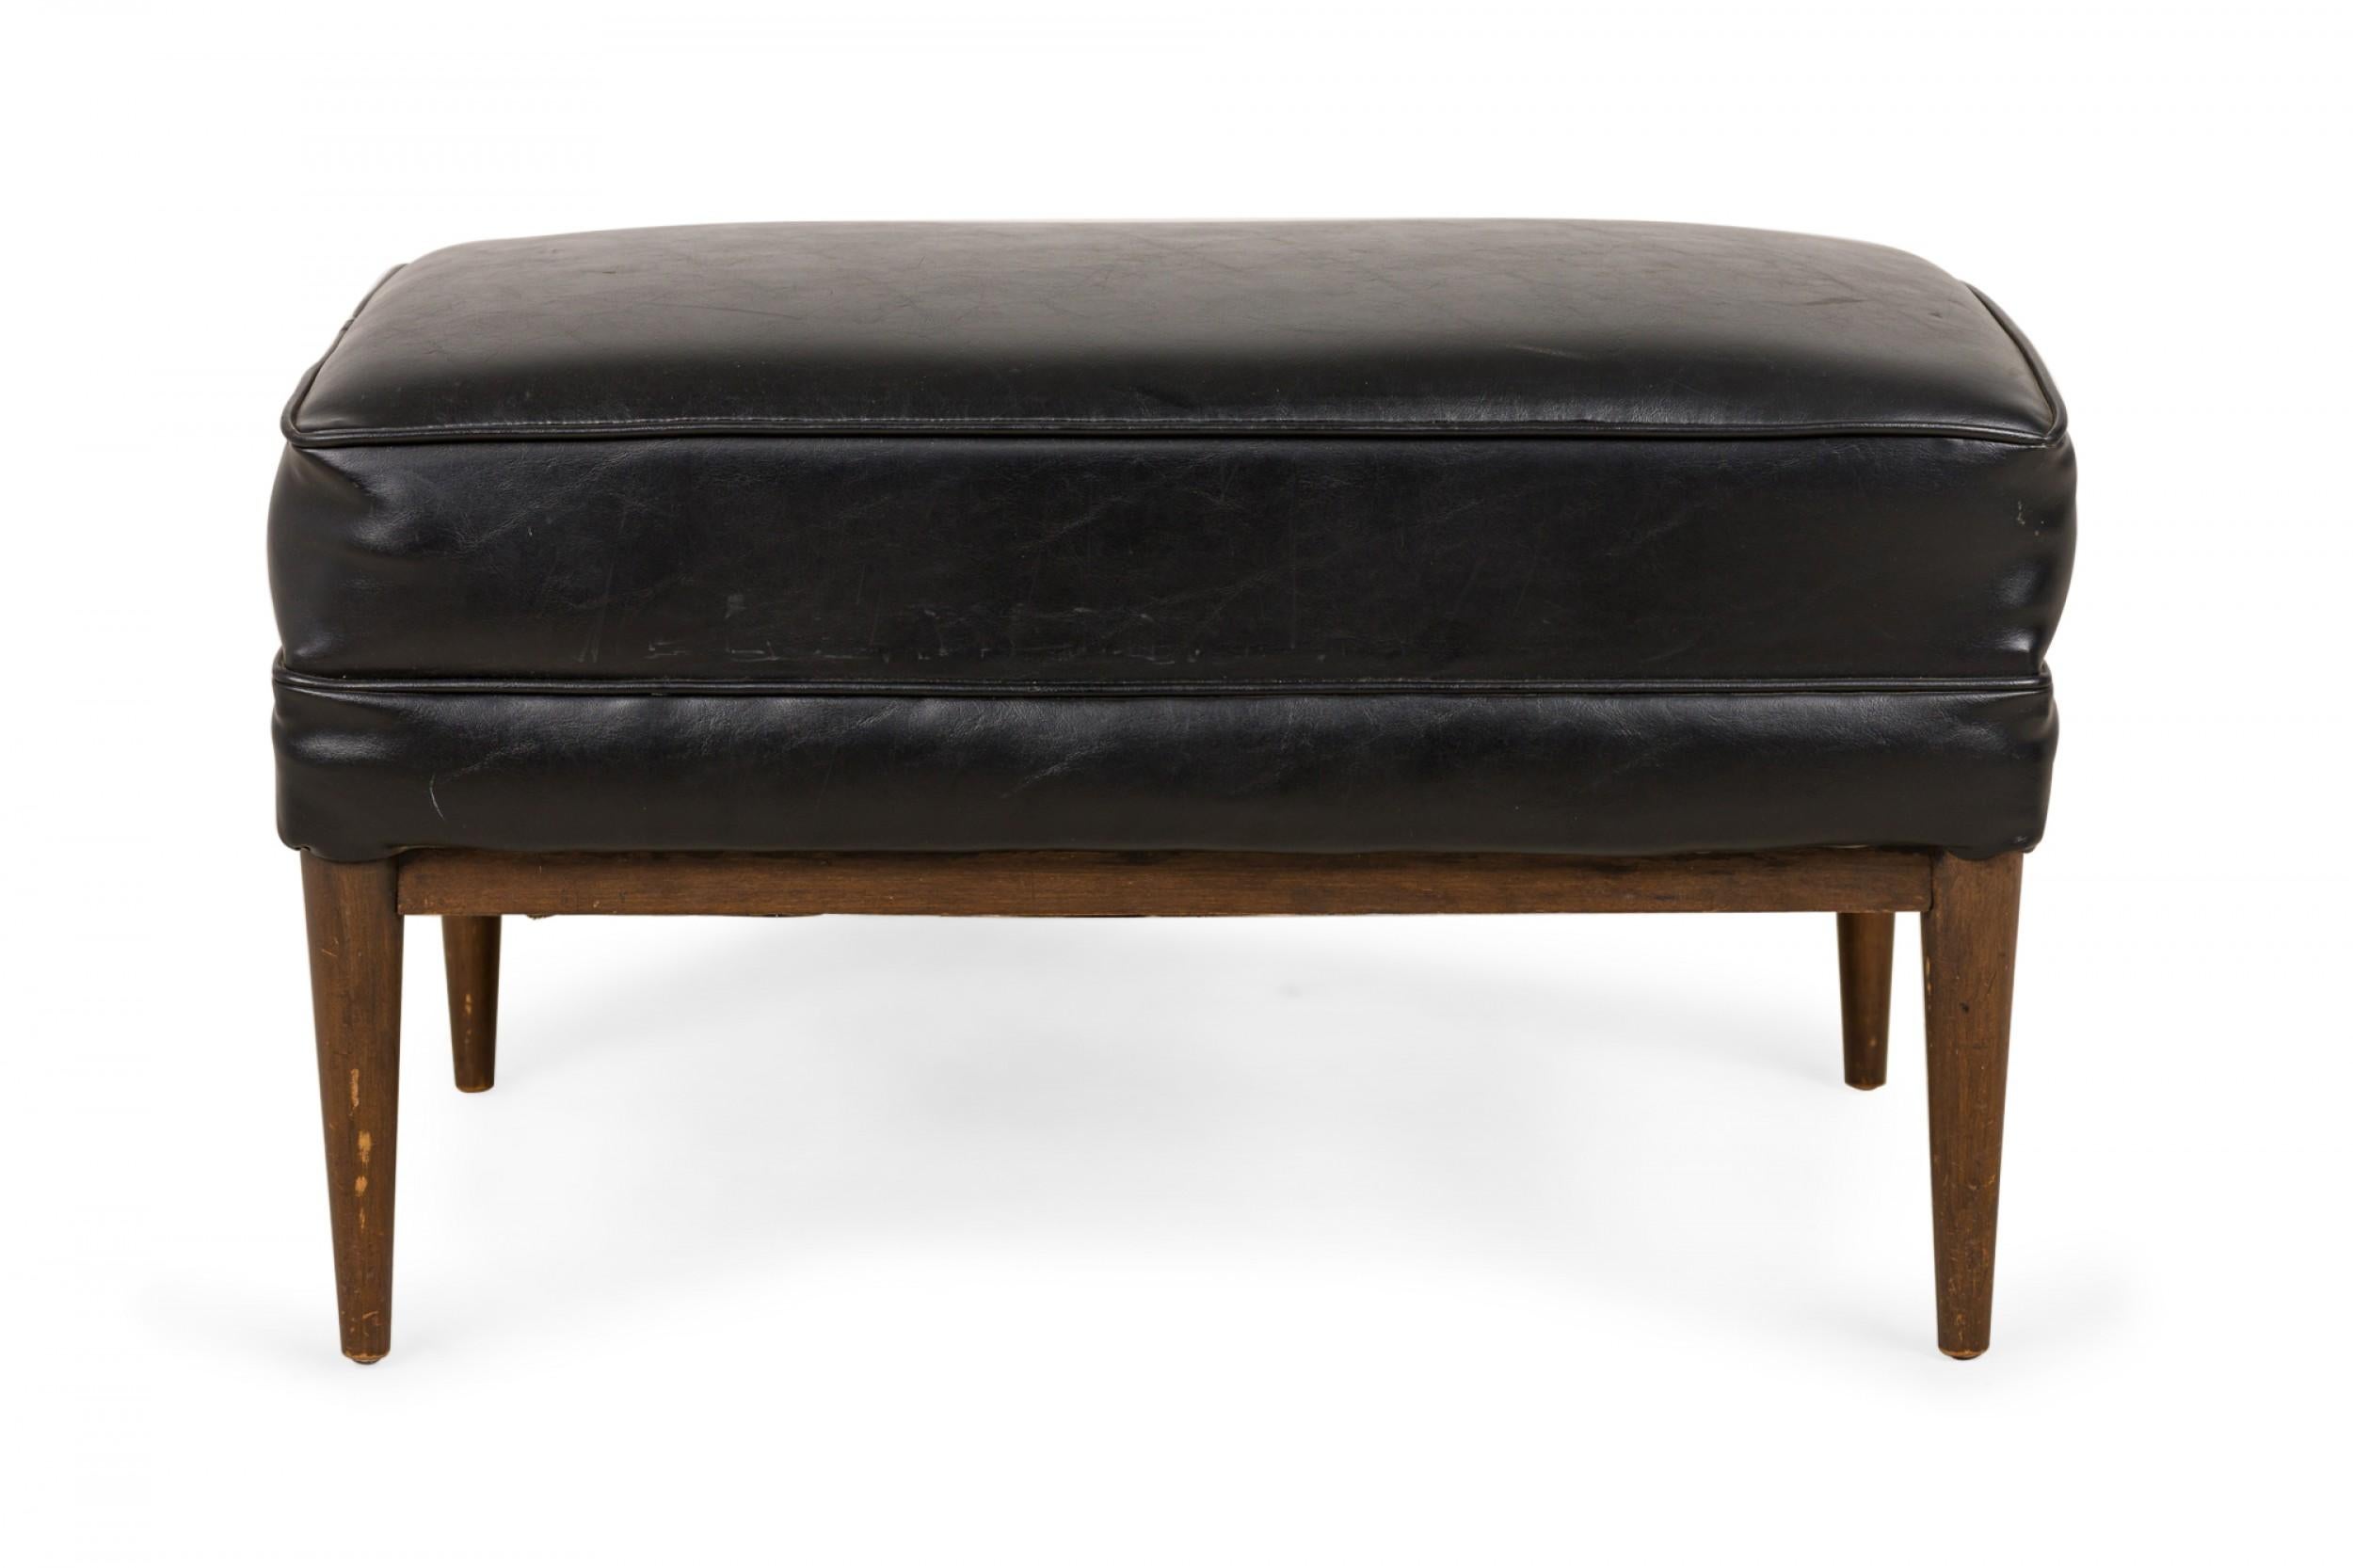 American mid-century rectangular ottoman with a black vinyl upholstered top resting on a walnut base with tapered legs. (PAUL MCCOBB FOR DIRECTIONAL)